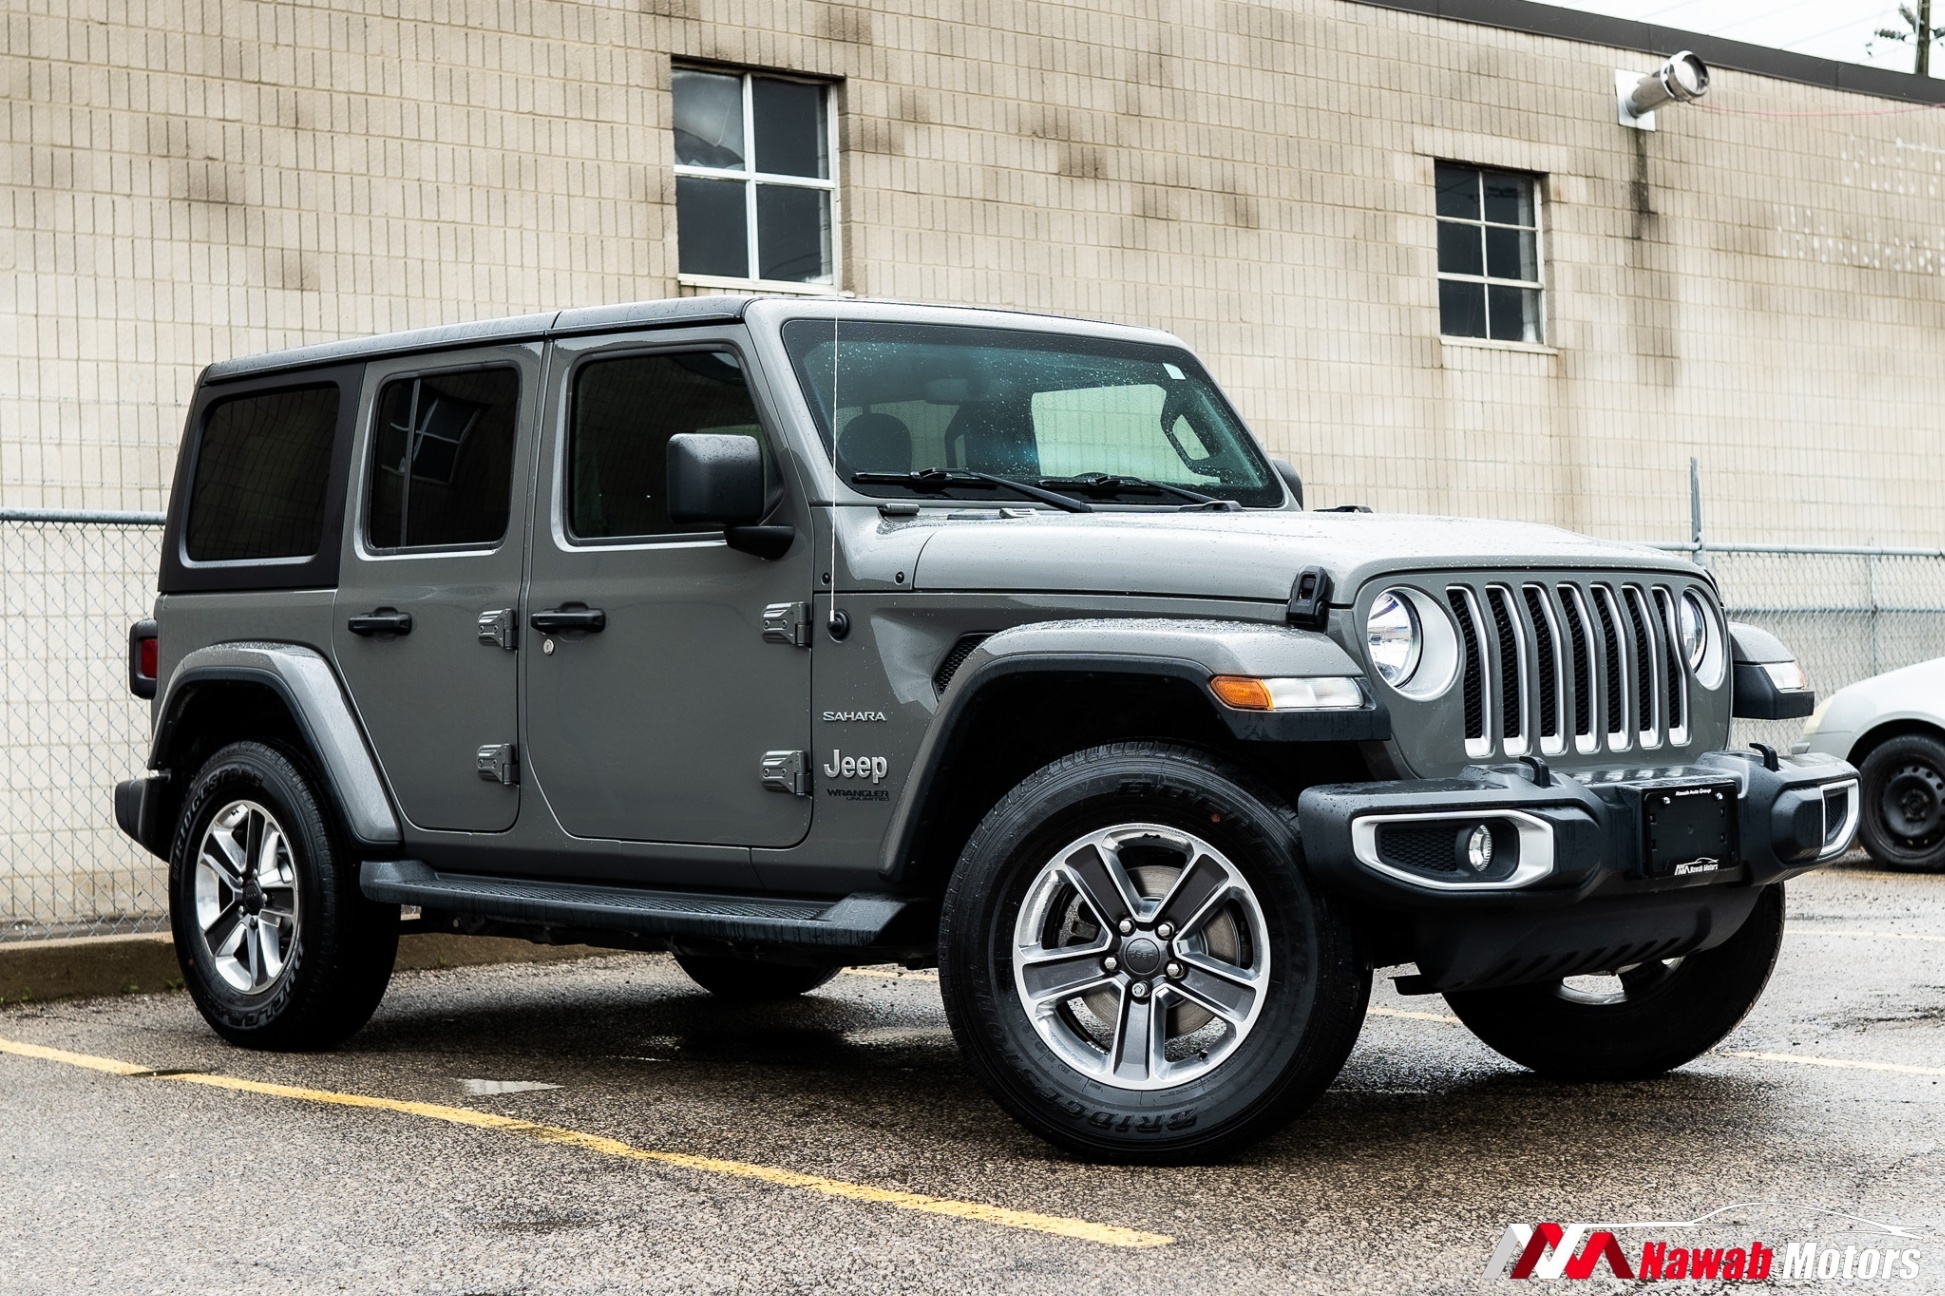 2020 Jeep WRANGLER UNLIMITED SAHARA UNLIMITED|4x4|HEATED SEATS|UCONNECT|CRUISE 